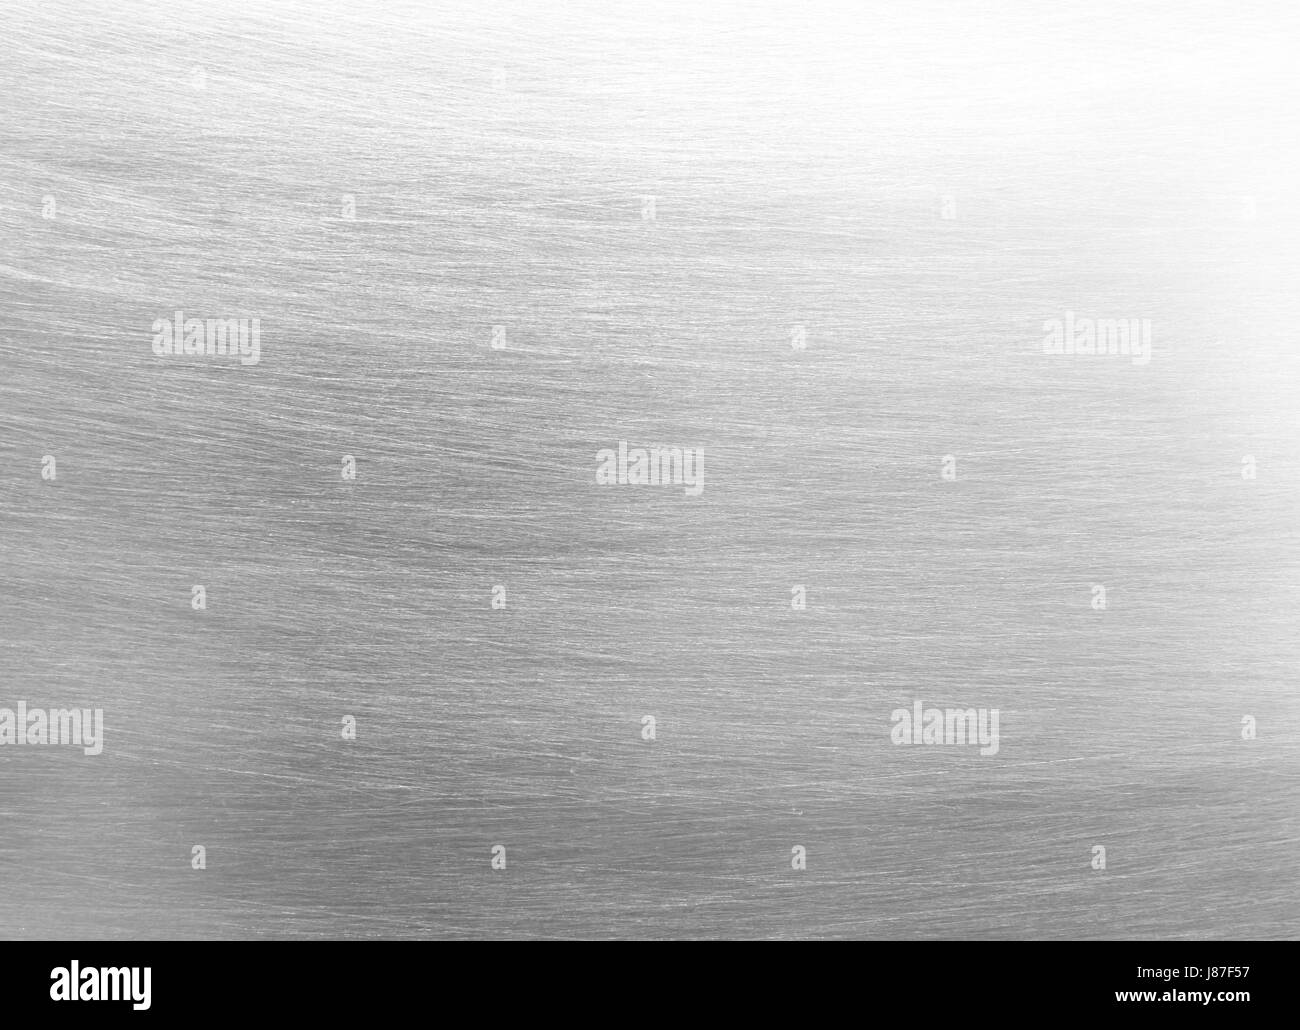 Sheet metal silver solid black background industry Stock Photo - Alamy